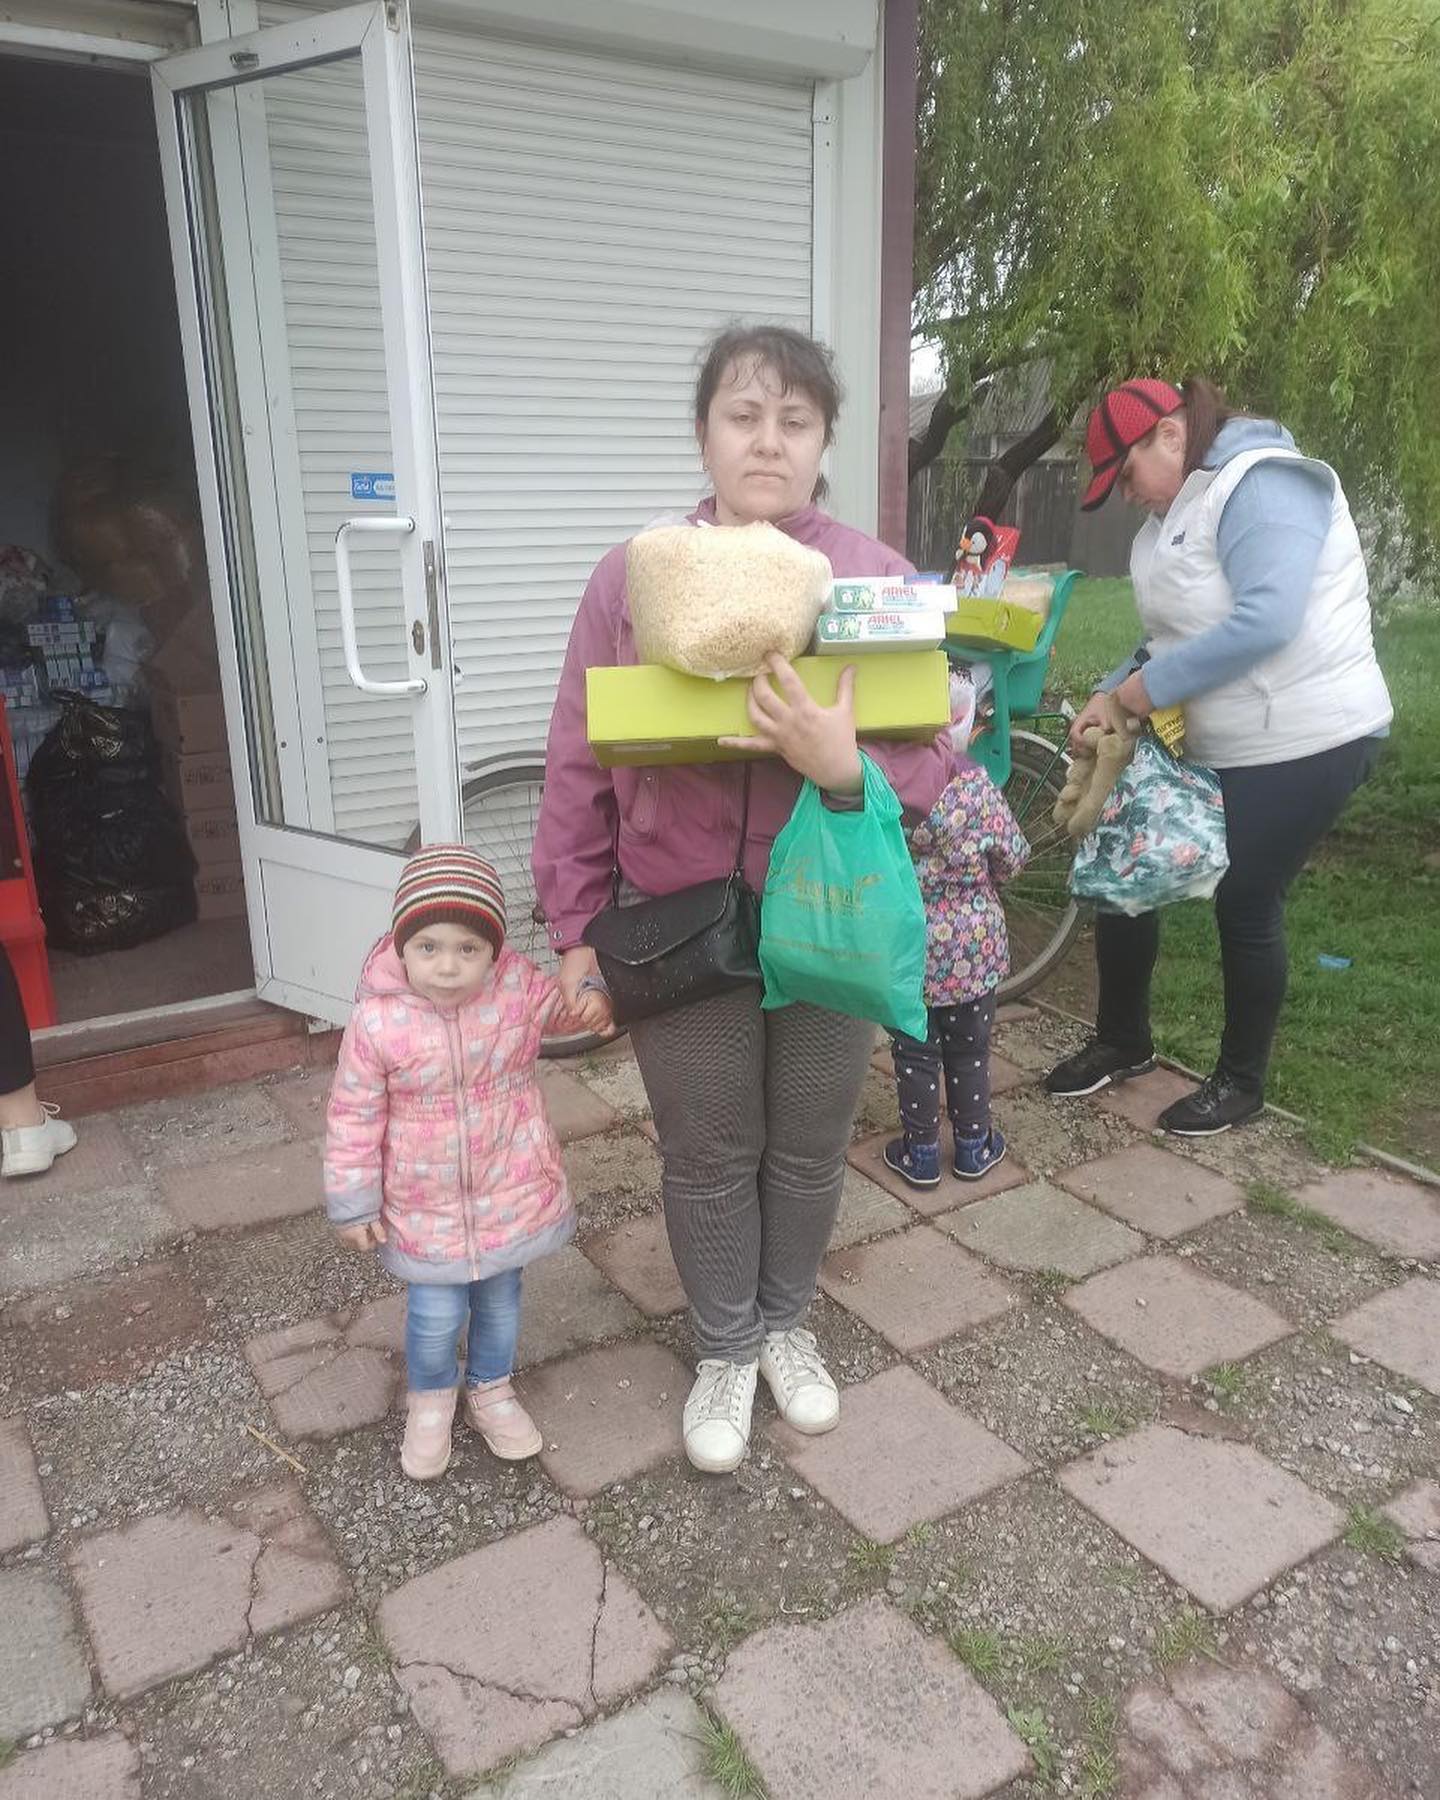 A woman holding a large loaf of bread and a box of humanitarian aid stands outside a garage with a young child by her side, as another person works in the background.